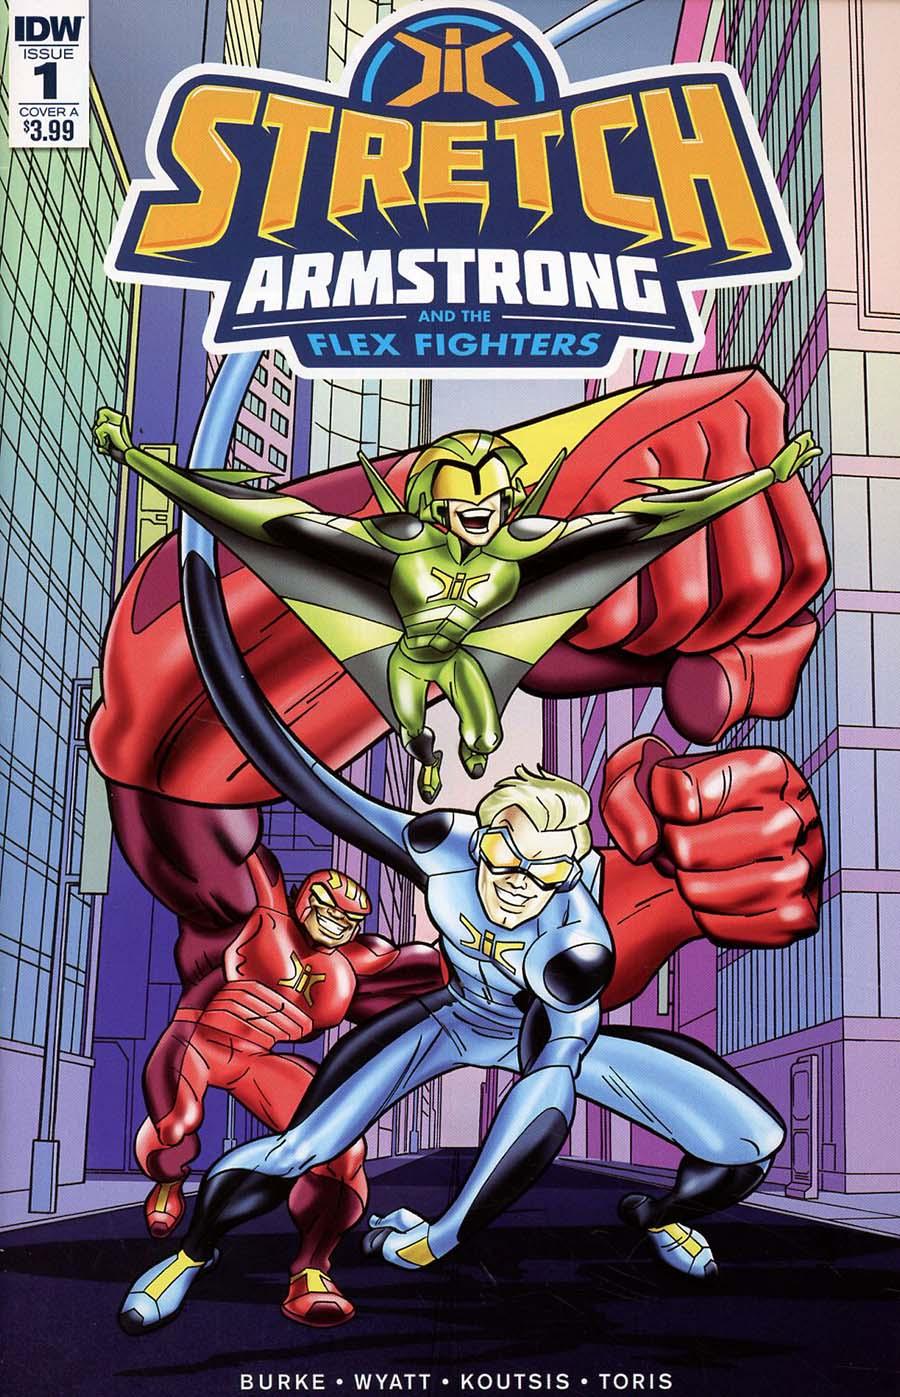 Stretch Armstrong And The Flex Fighters Vol. 1 #1